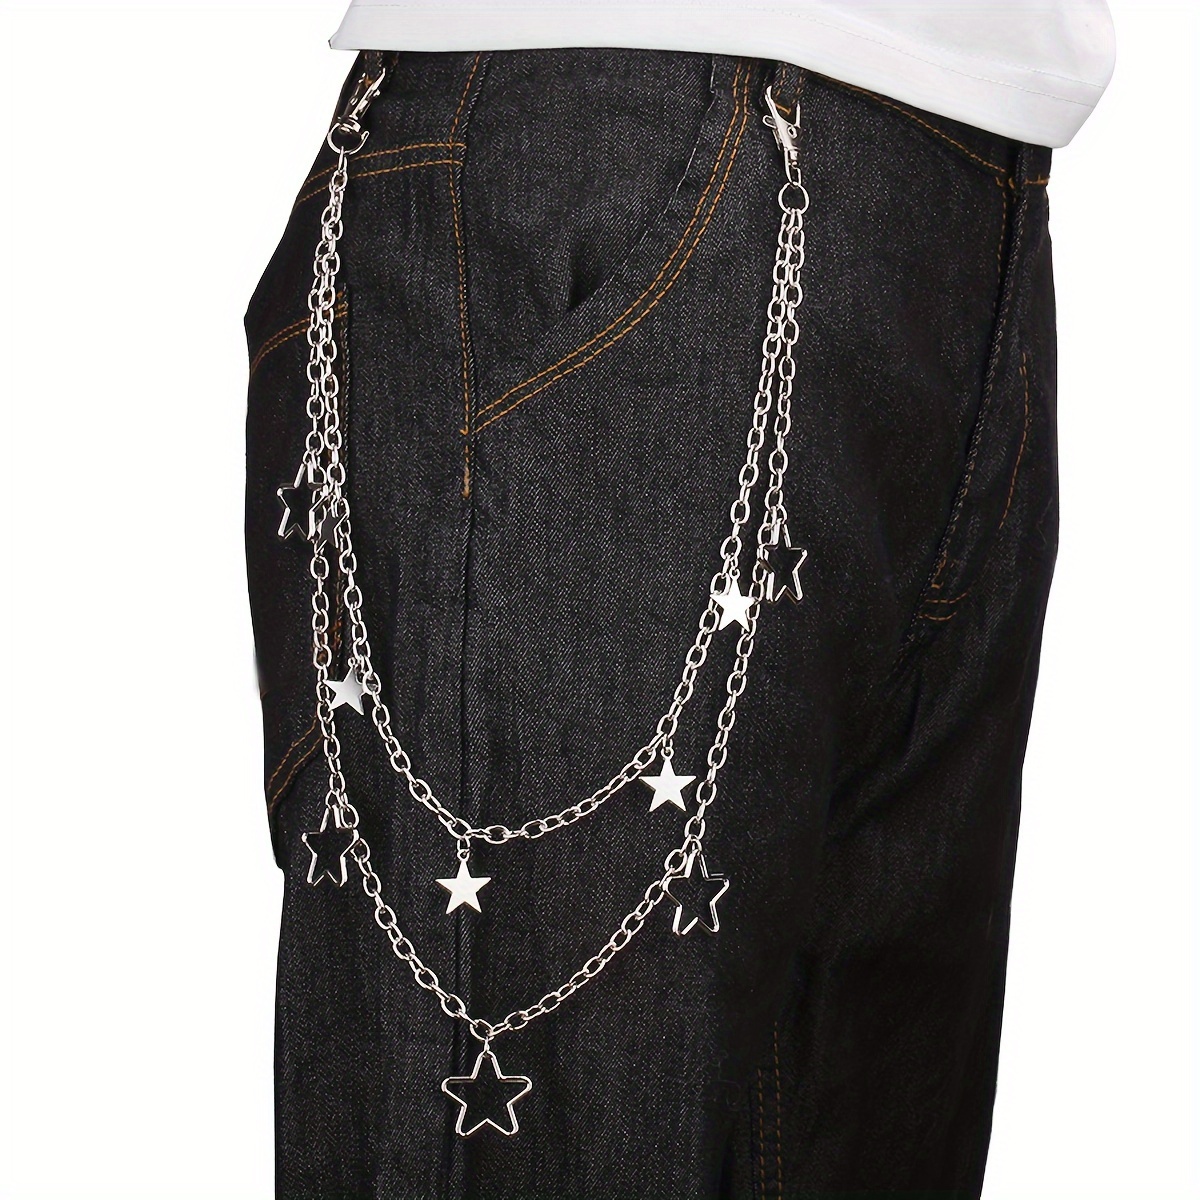 PINKPIN Trouser Chains for Men Pants Chain Jean Chains Belt Chain